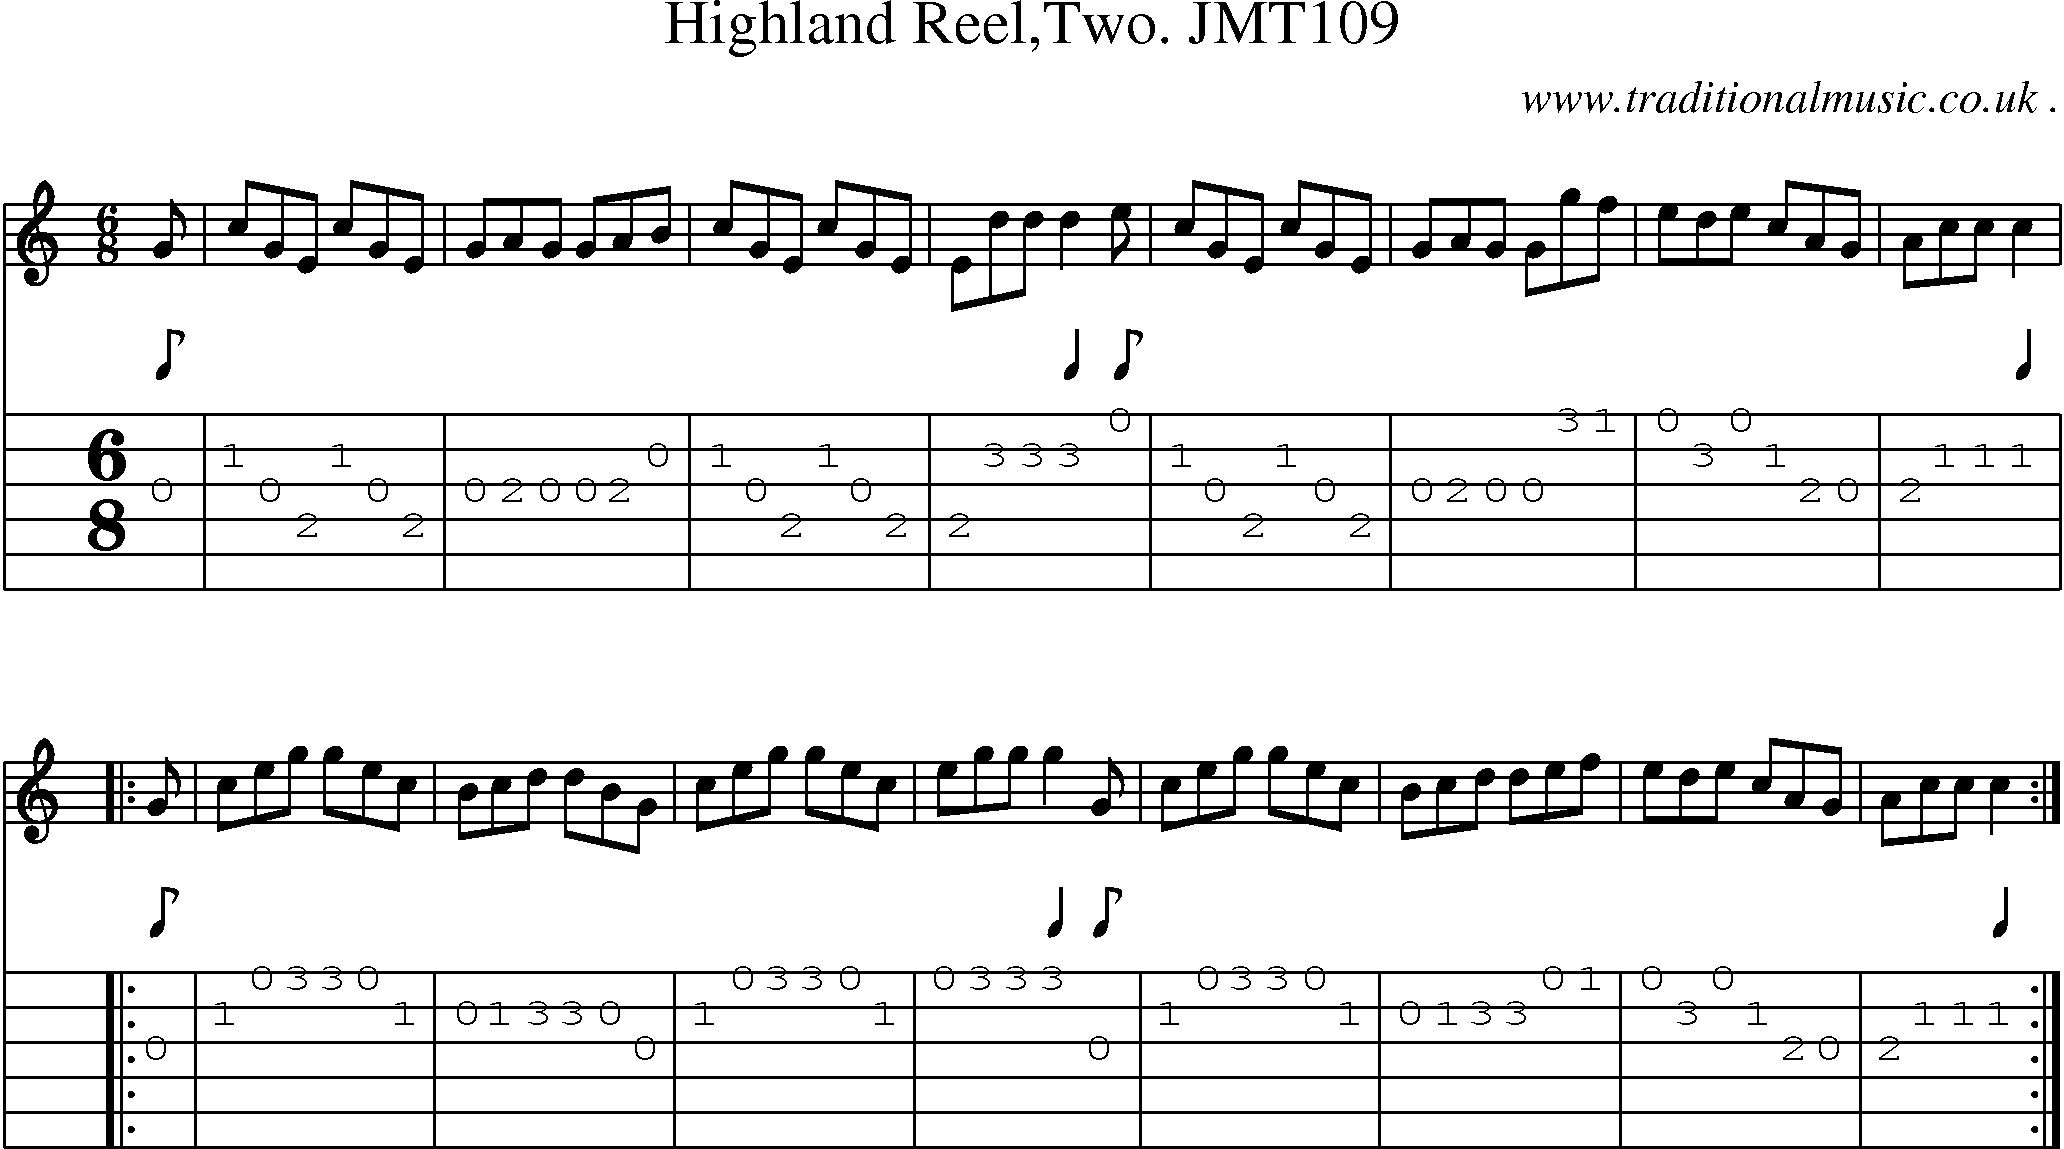 Sheet-music  score, Chords and Guitar Tabs for Highland Reeltwo Jmt109